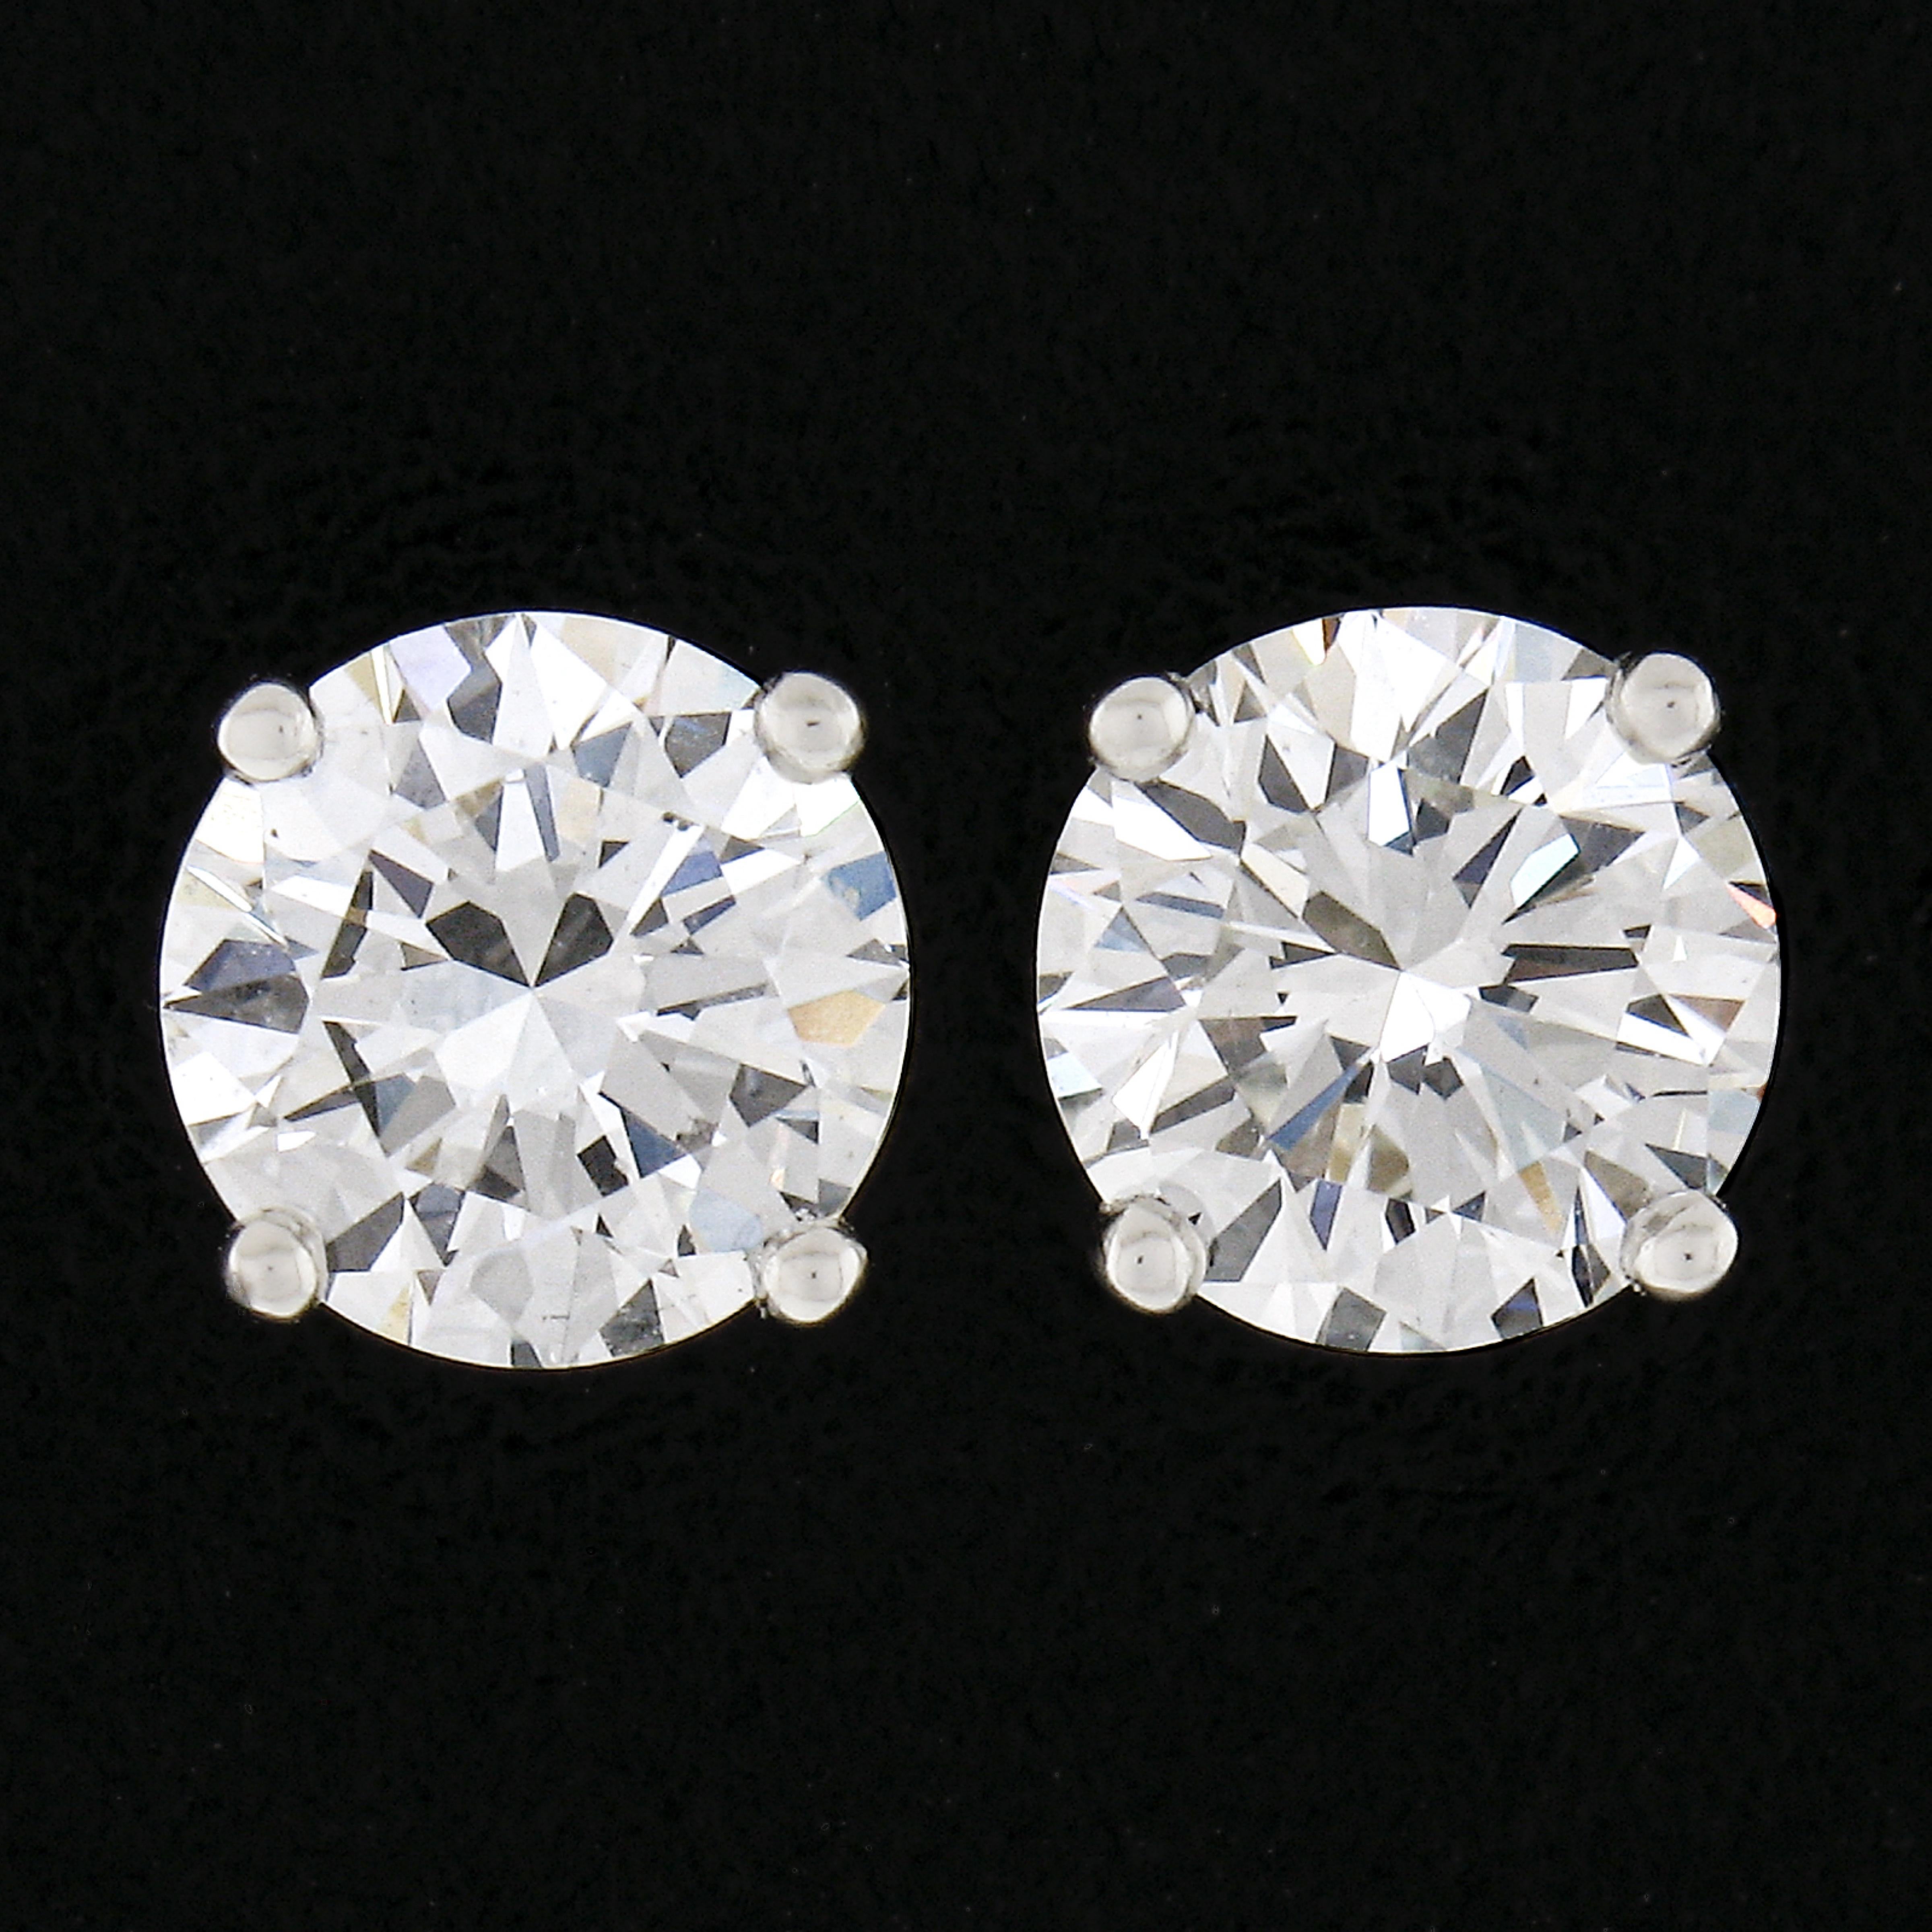 New Platinum 1.02ctw GIA Round Brilliant Diamond Martini 4 Prong Stud Earrings In New Condition For Sale In Montclair, NJ